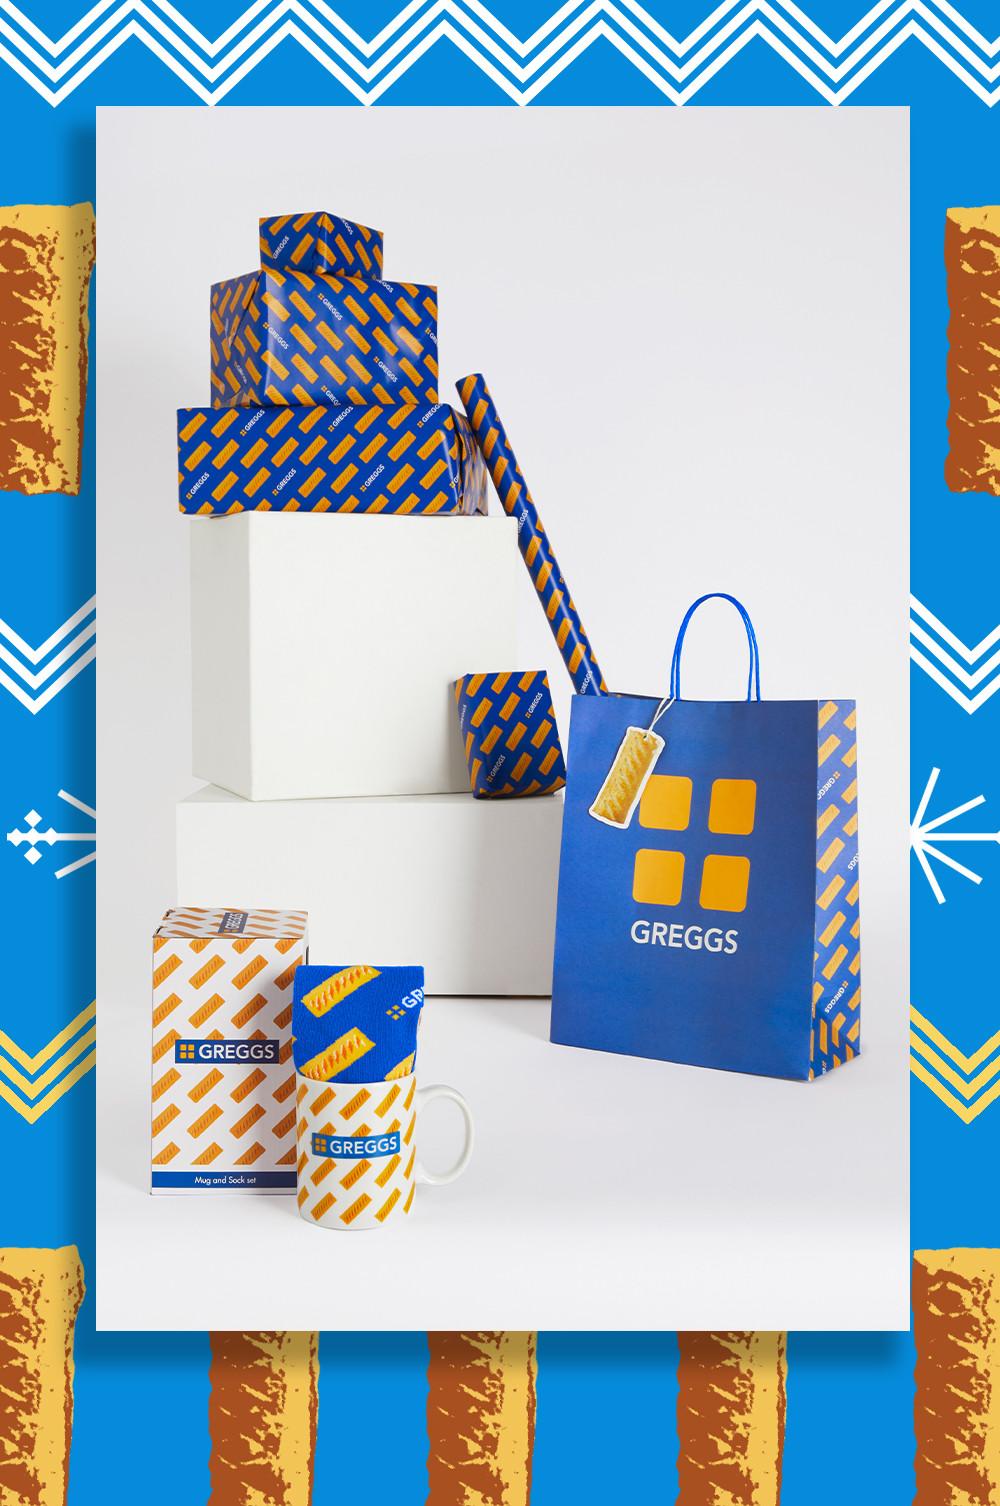 Primark X Greggs Christmas Clothing & Gifting Collection